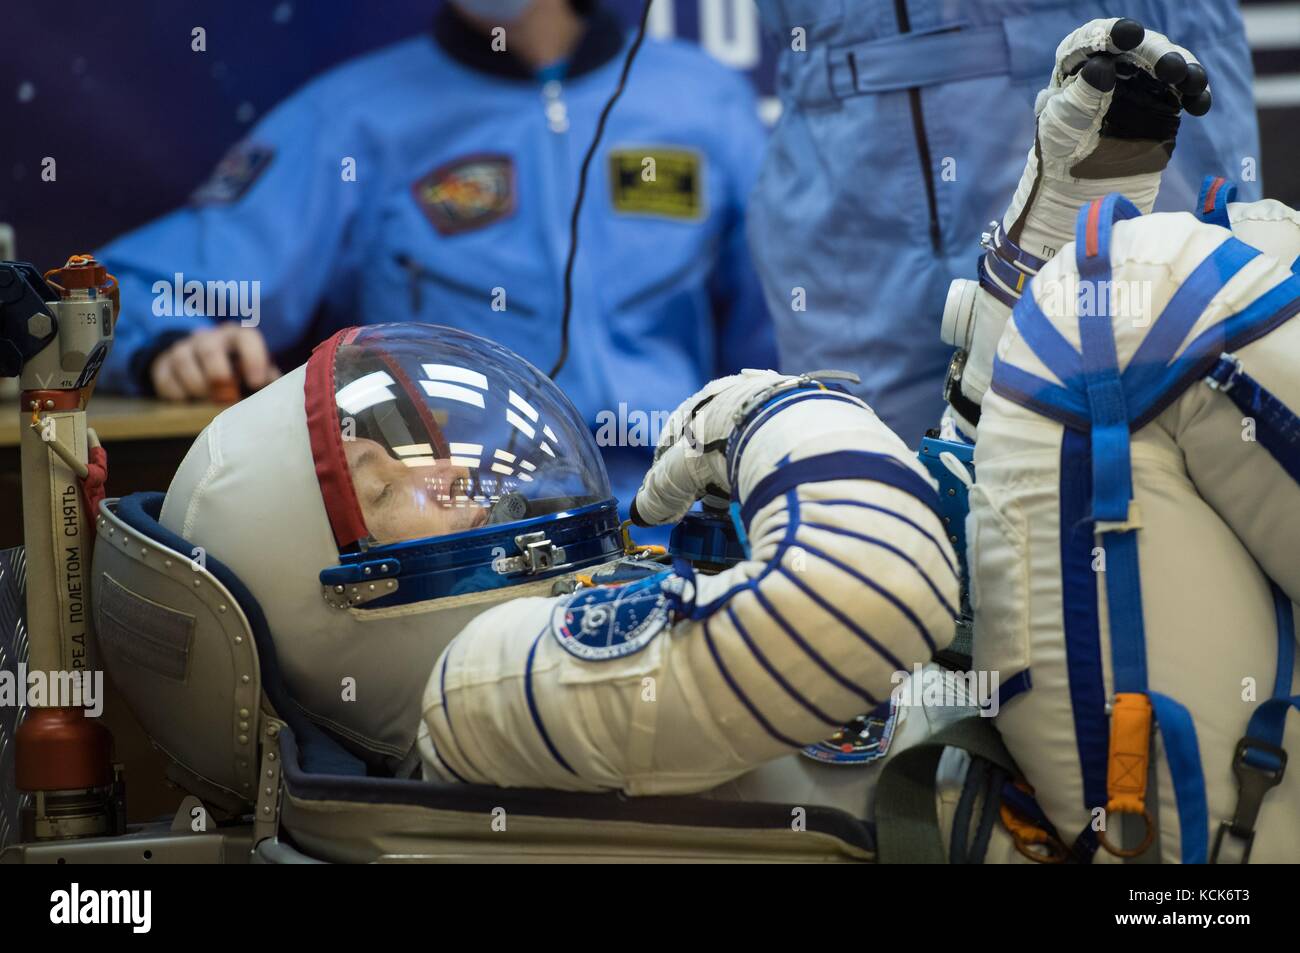 NASA International Space Station Expedition 52 prime crew member American astronaut Randy Bresnik has his Sokol spacesuit pressure checked in preparation for the Soyuz MS-05 launch at the Baikonur Cosmodrome July 28, 2017 in Baikonur, Kazakhstan.  (photo by Joel Kowsky  via Planetpix) Stock Photo